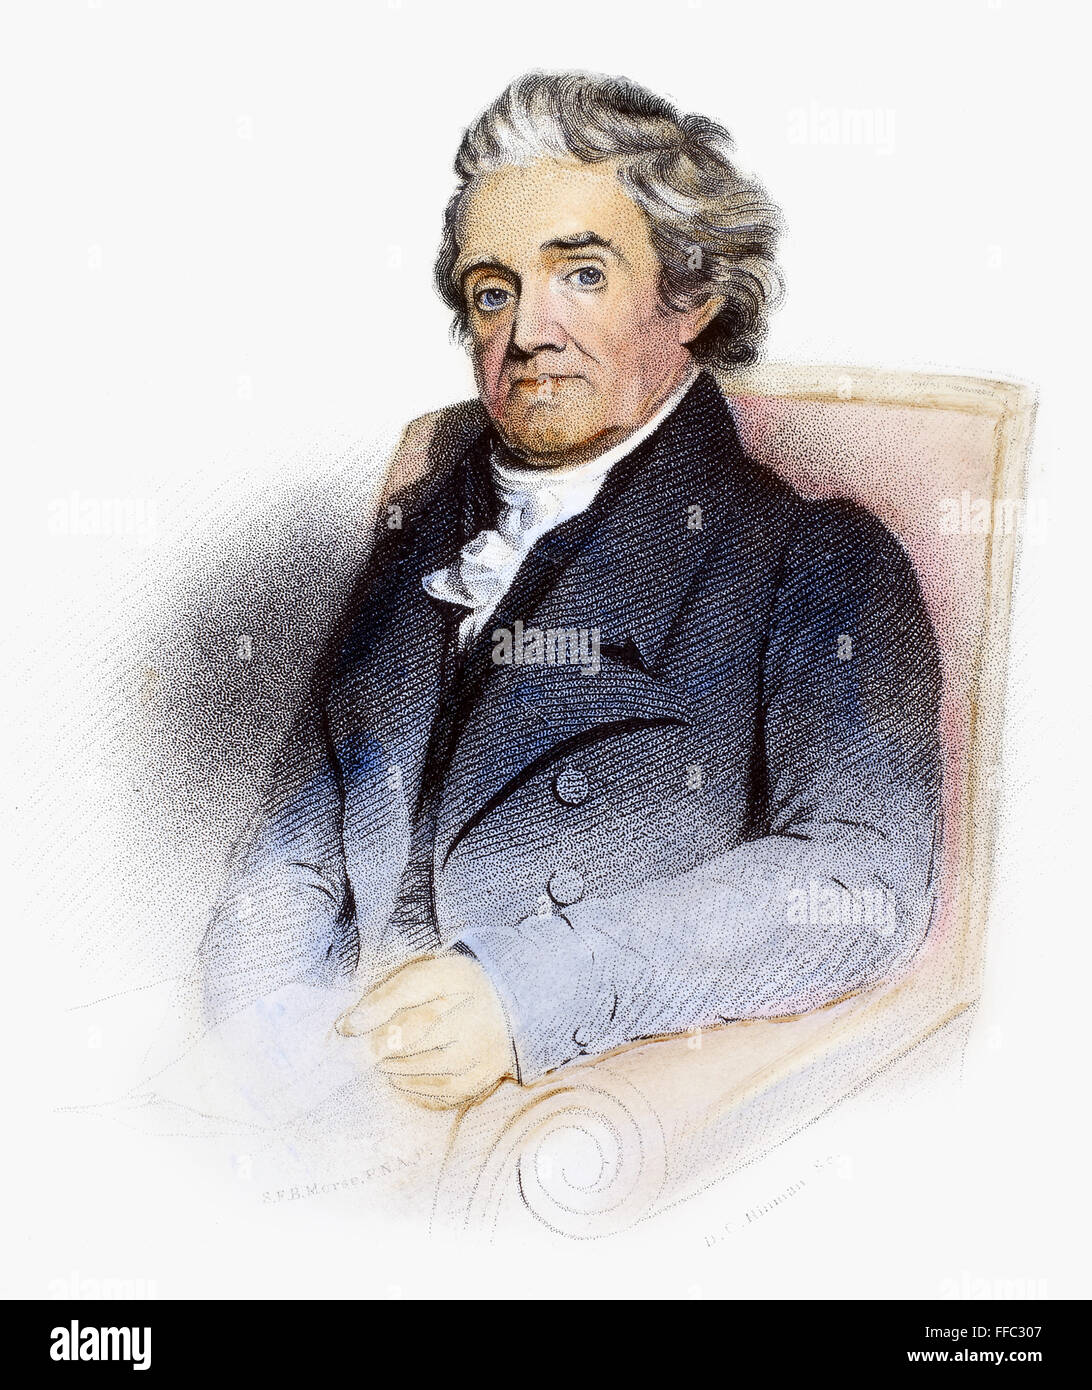 NOAH WEBSTER (1758-1843). /nAmerican lexicographer and author. Steel engraving, 1848, after a painting by Samuel F.B. Morse. Stock Photo